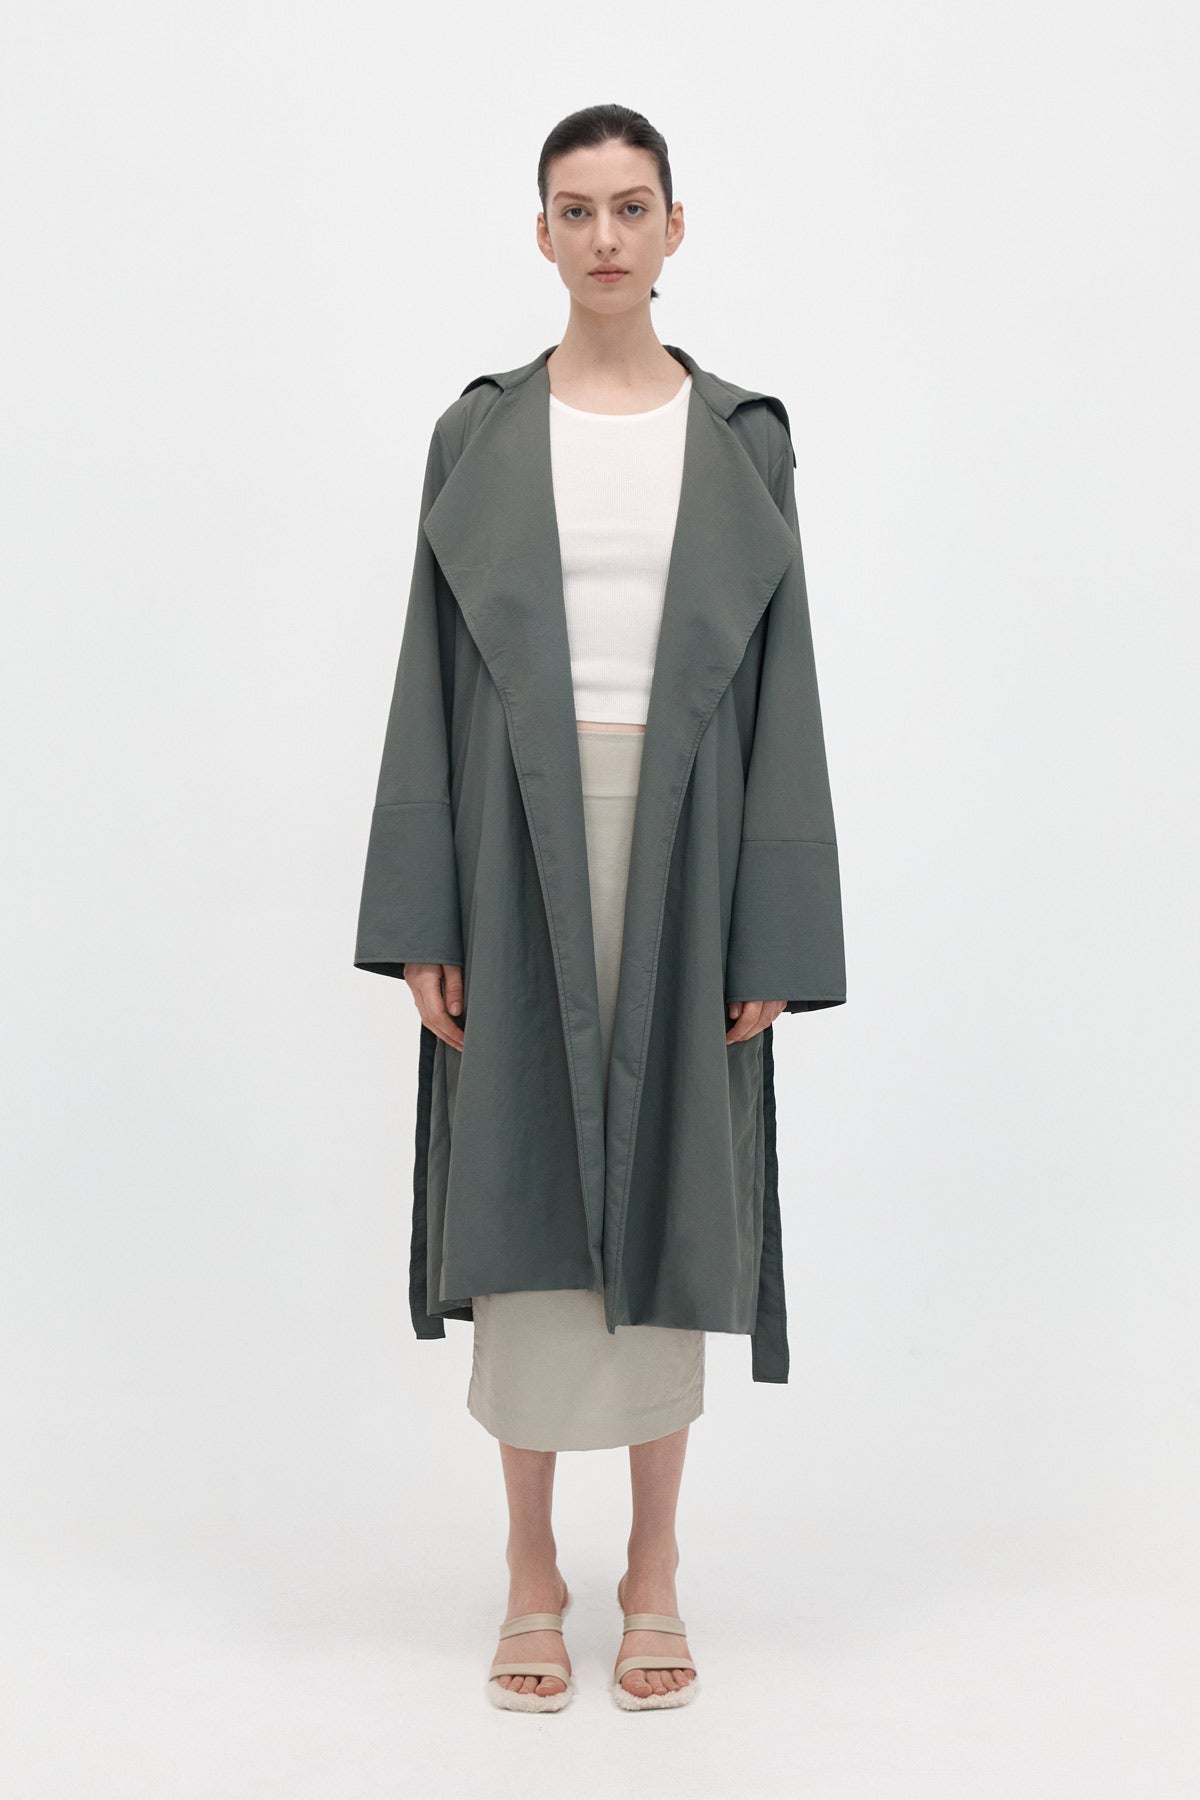 Summer Trench Coat - Thyme